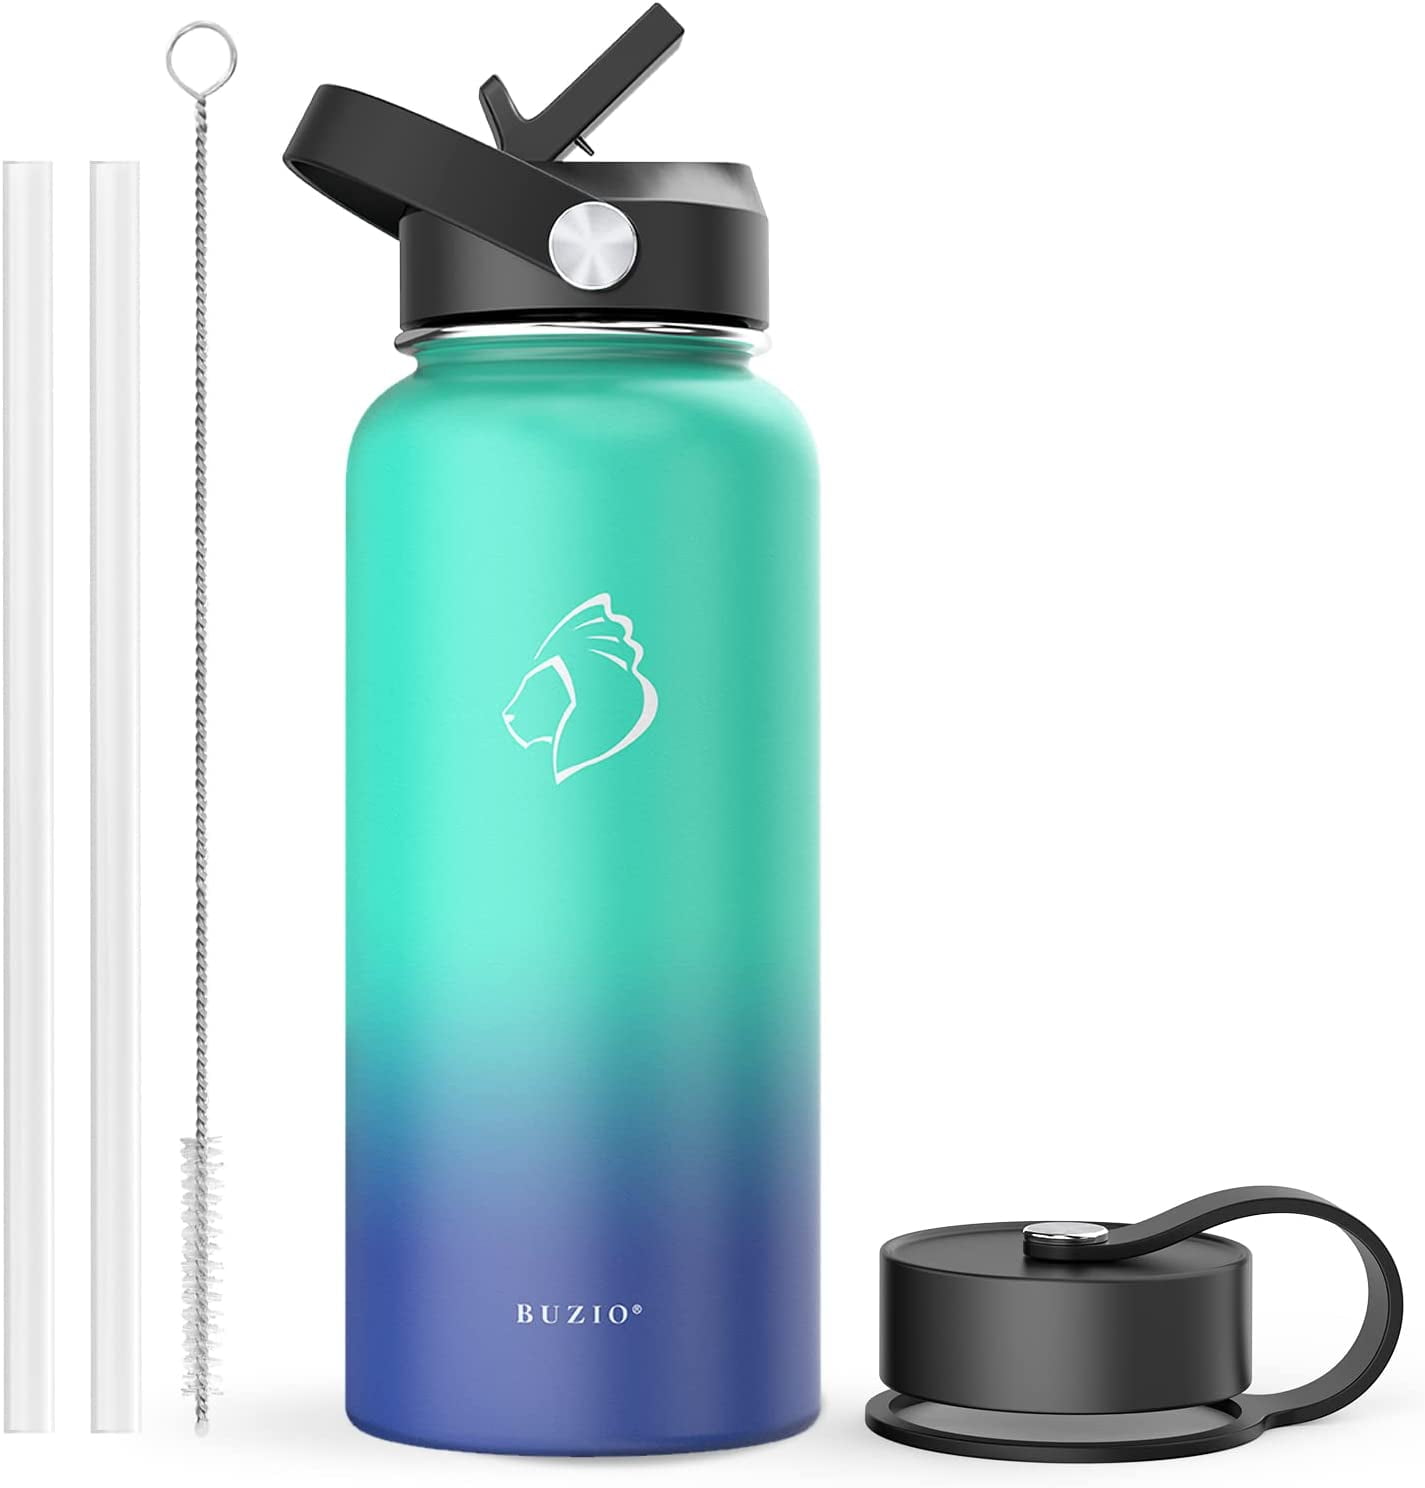 Buzio 32 oz Insulated Water Bottle with Straw Lid and Flex Cap, Double Wall Wide Mouth BPA Free Leak Proof Water Flask, Cold for 48 Hrs Hot for 24 Hrs